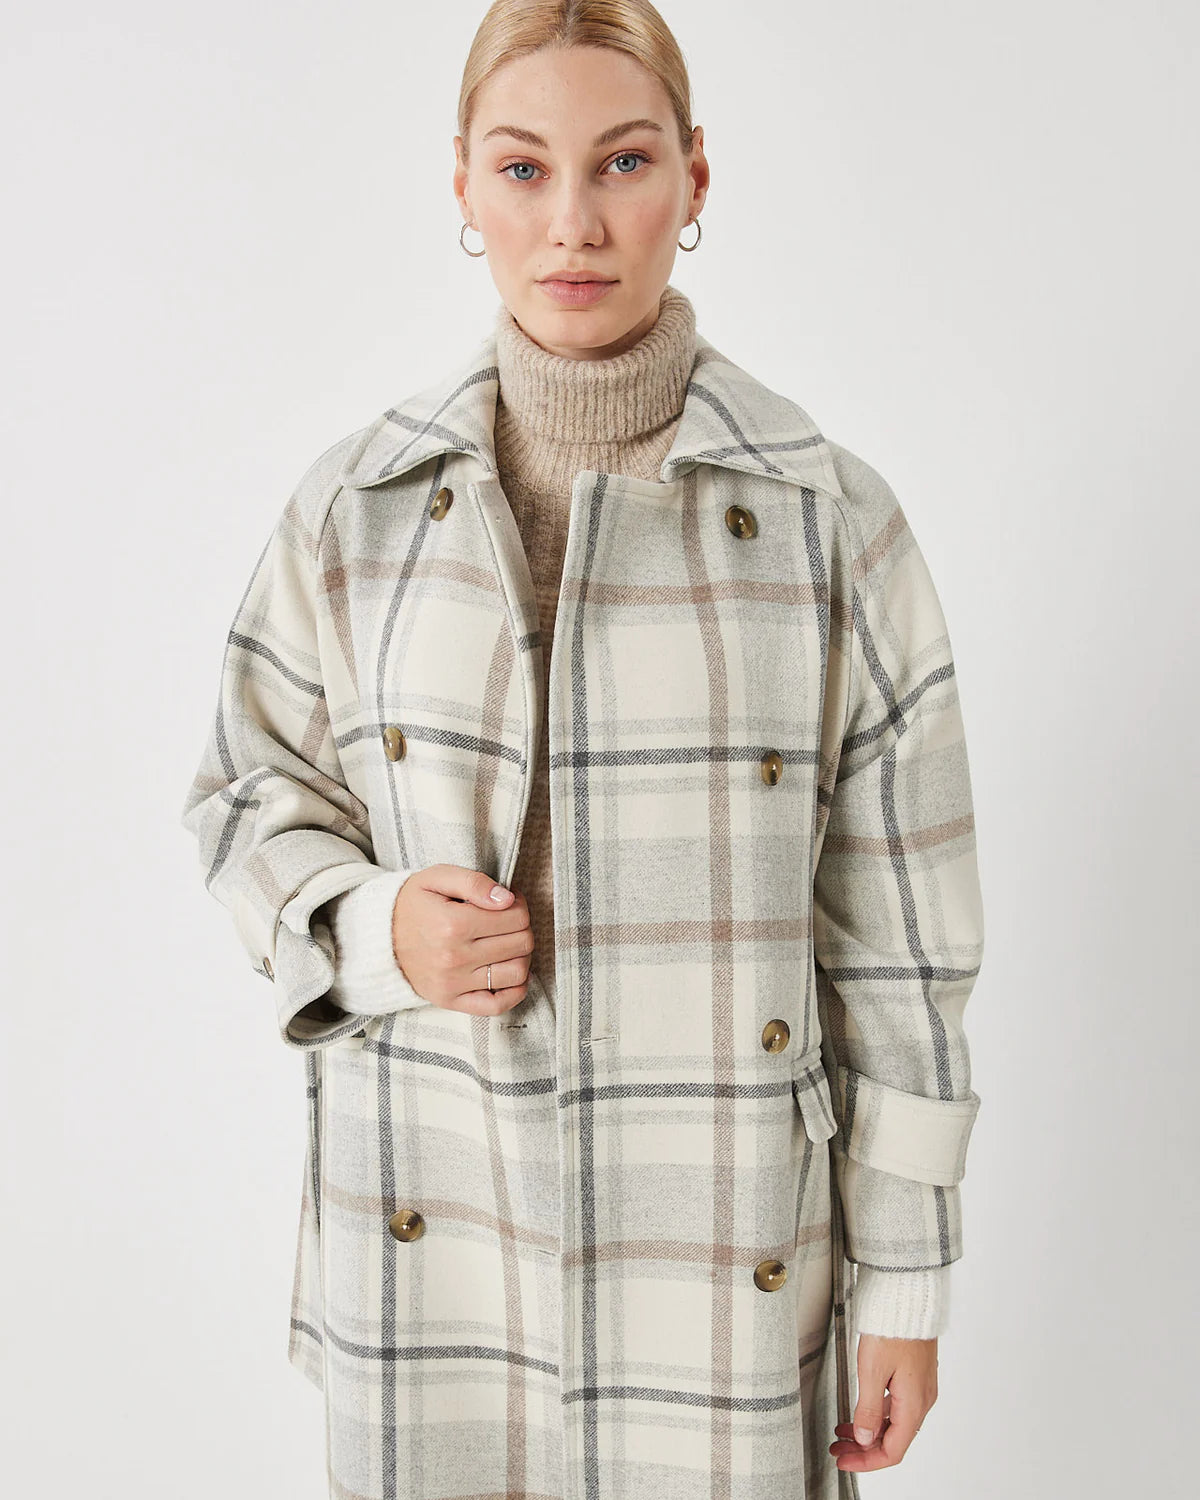 Lissu Wool Trench Coat in Pine Bark Plaid